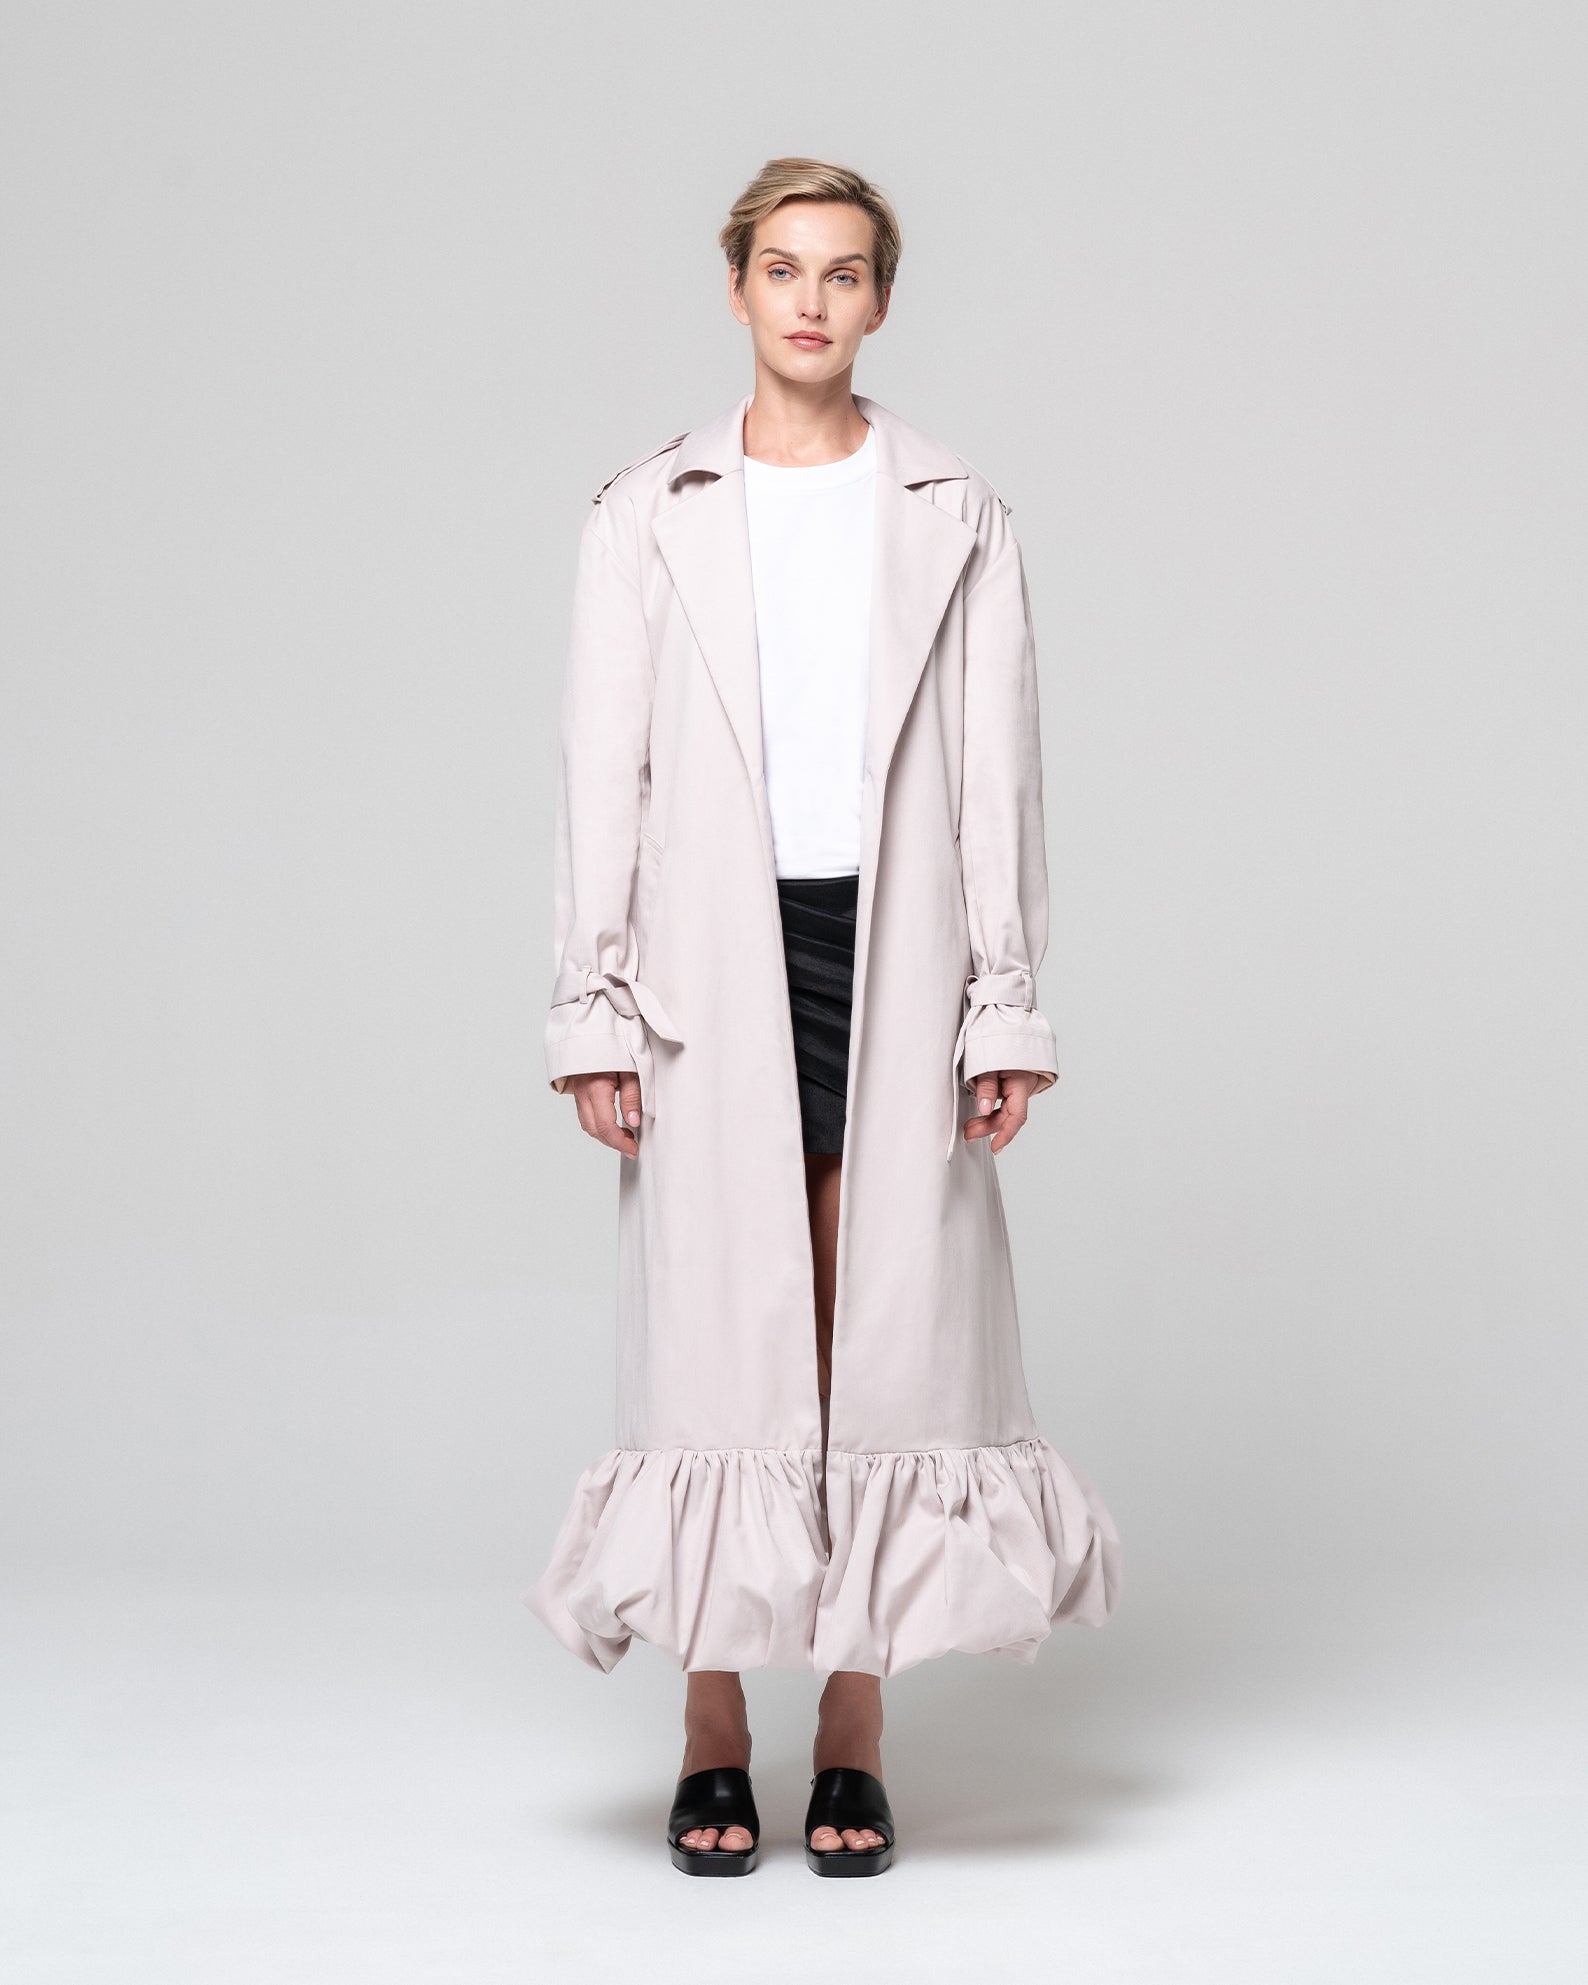 TAMY LIGHT GREY TRENCH COAT - RONI HELOU